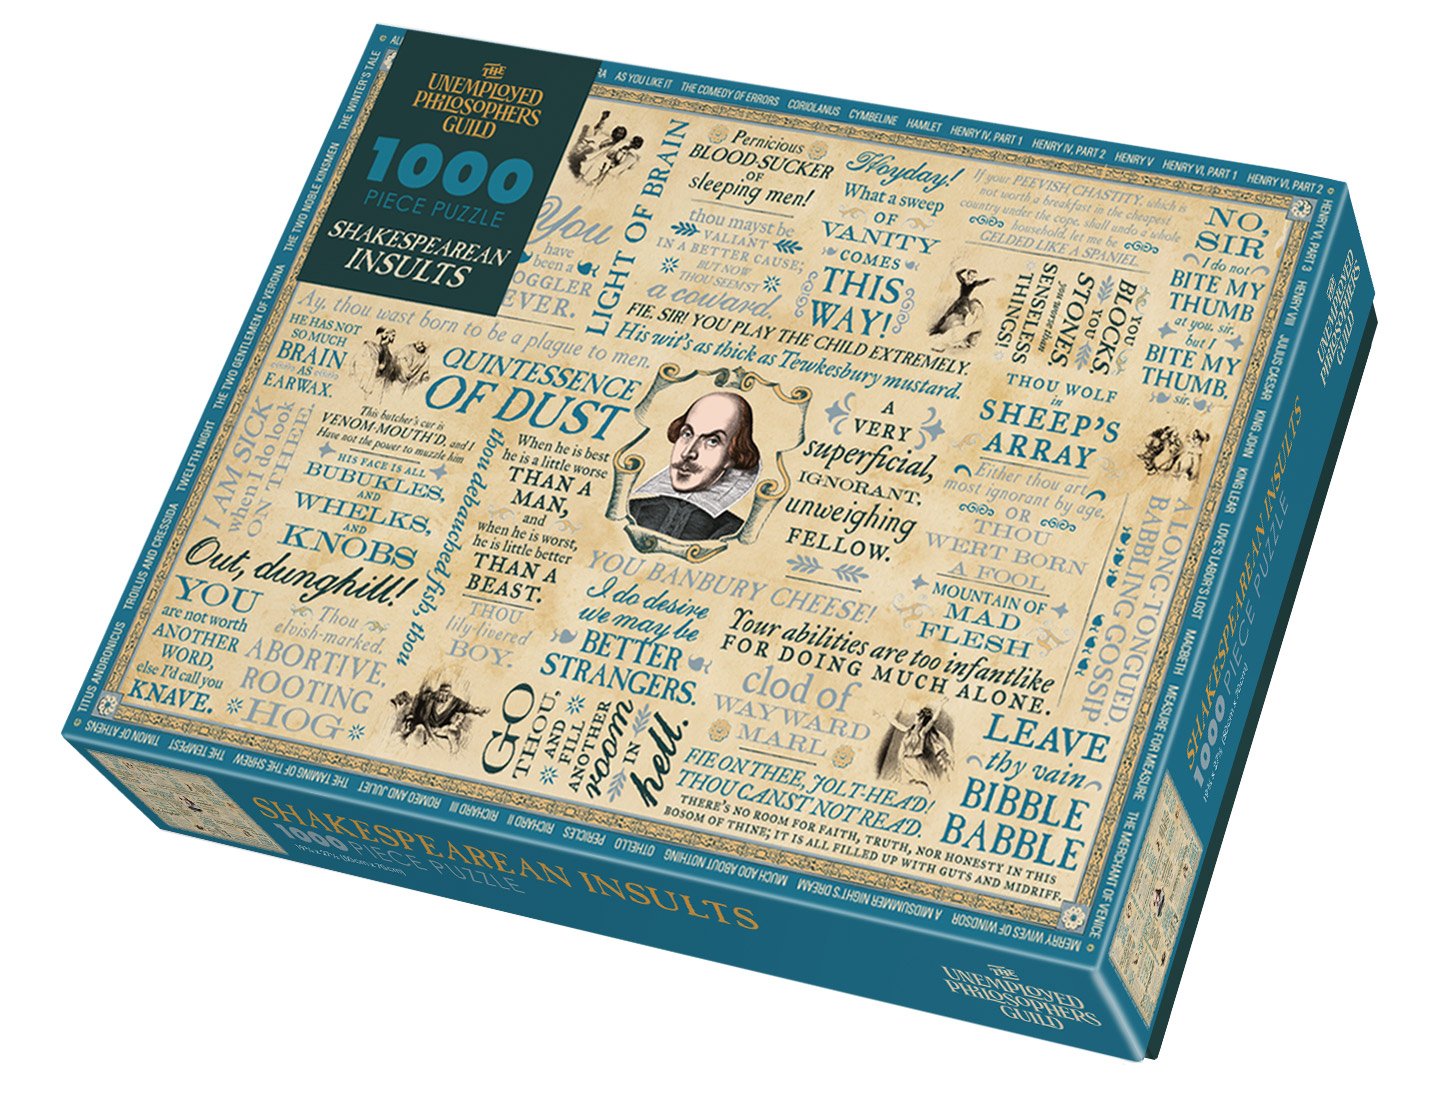 Shakespearean Insults 1000 Piece Puzzle    